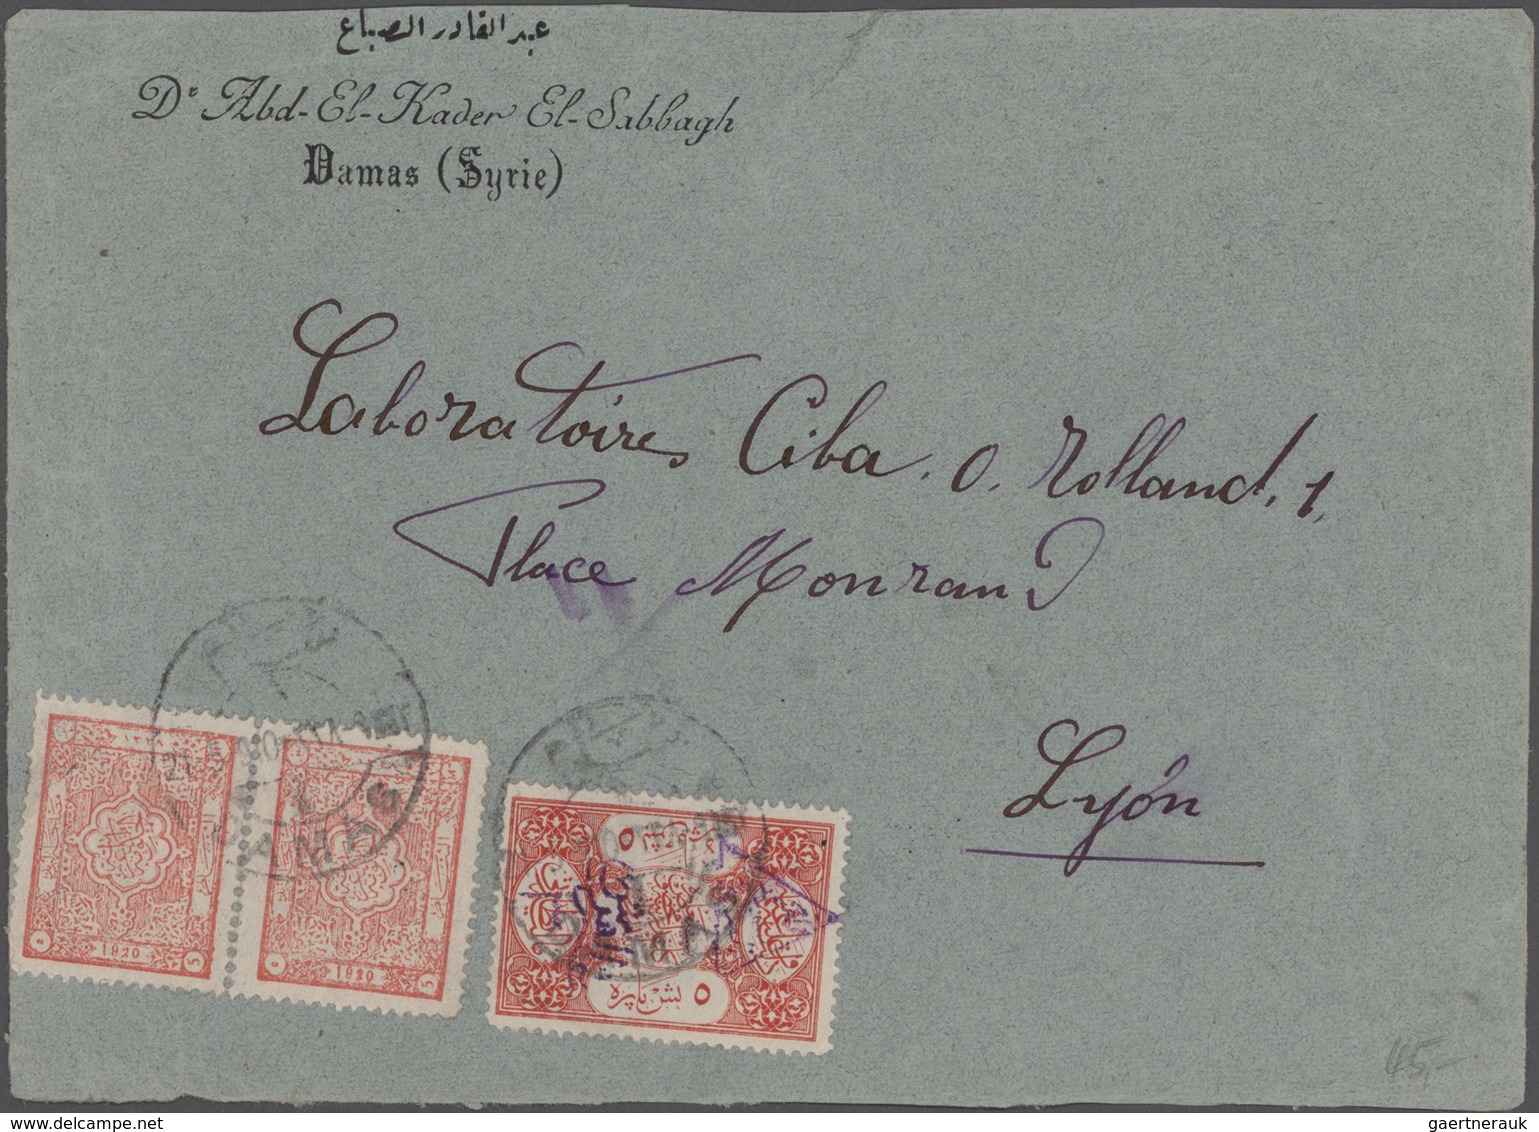 Alle Welt: Items of 145 covers and cards in the postal stationery album from various countries, incl